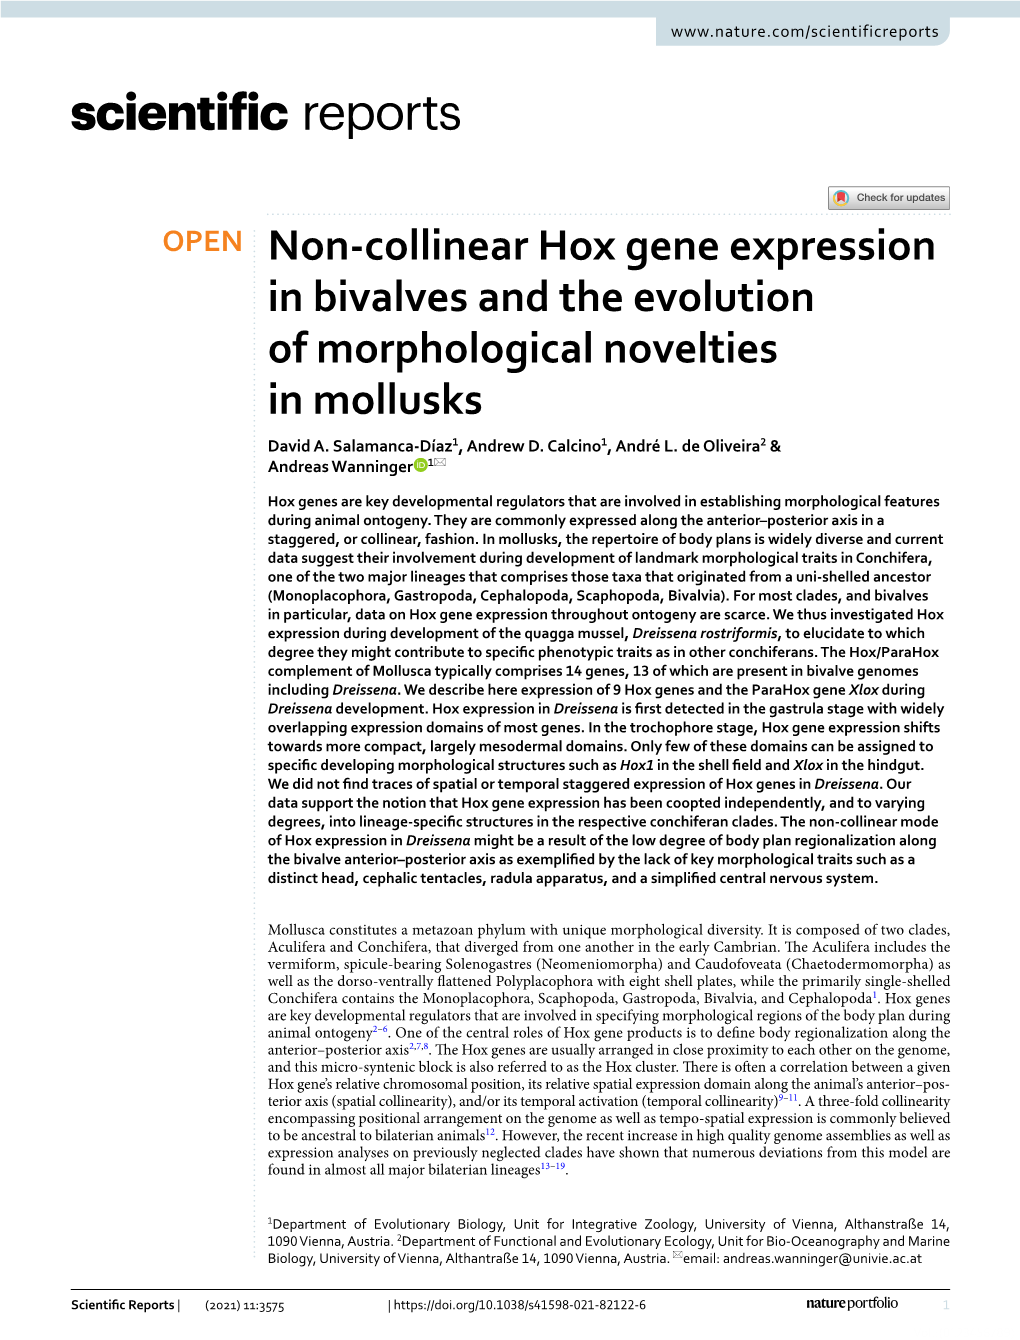 Non-Collinear Hox Gene Expression in Bivalves and the Evolution